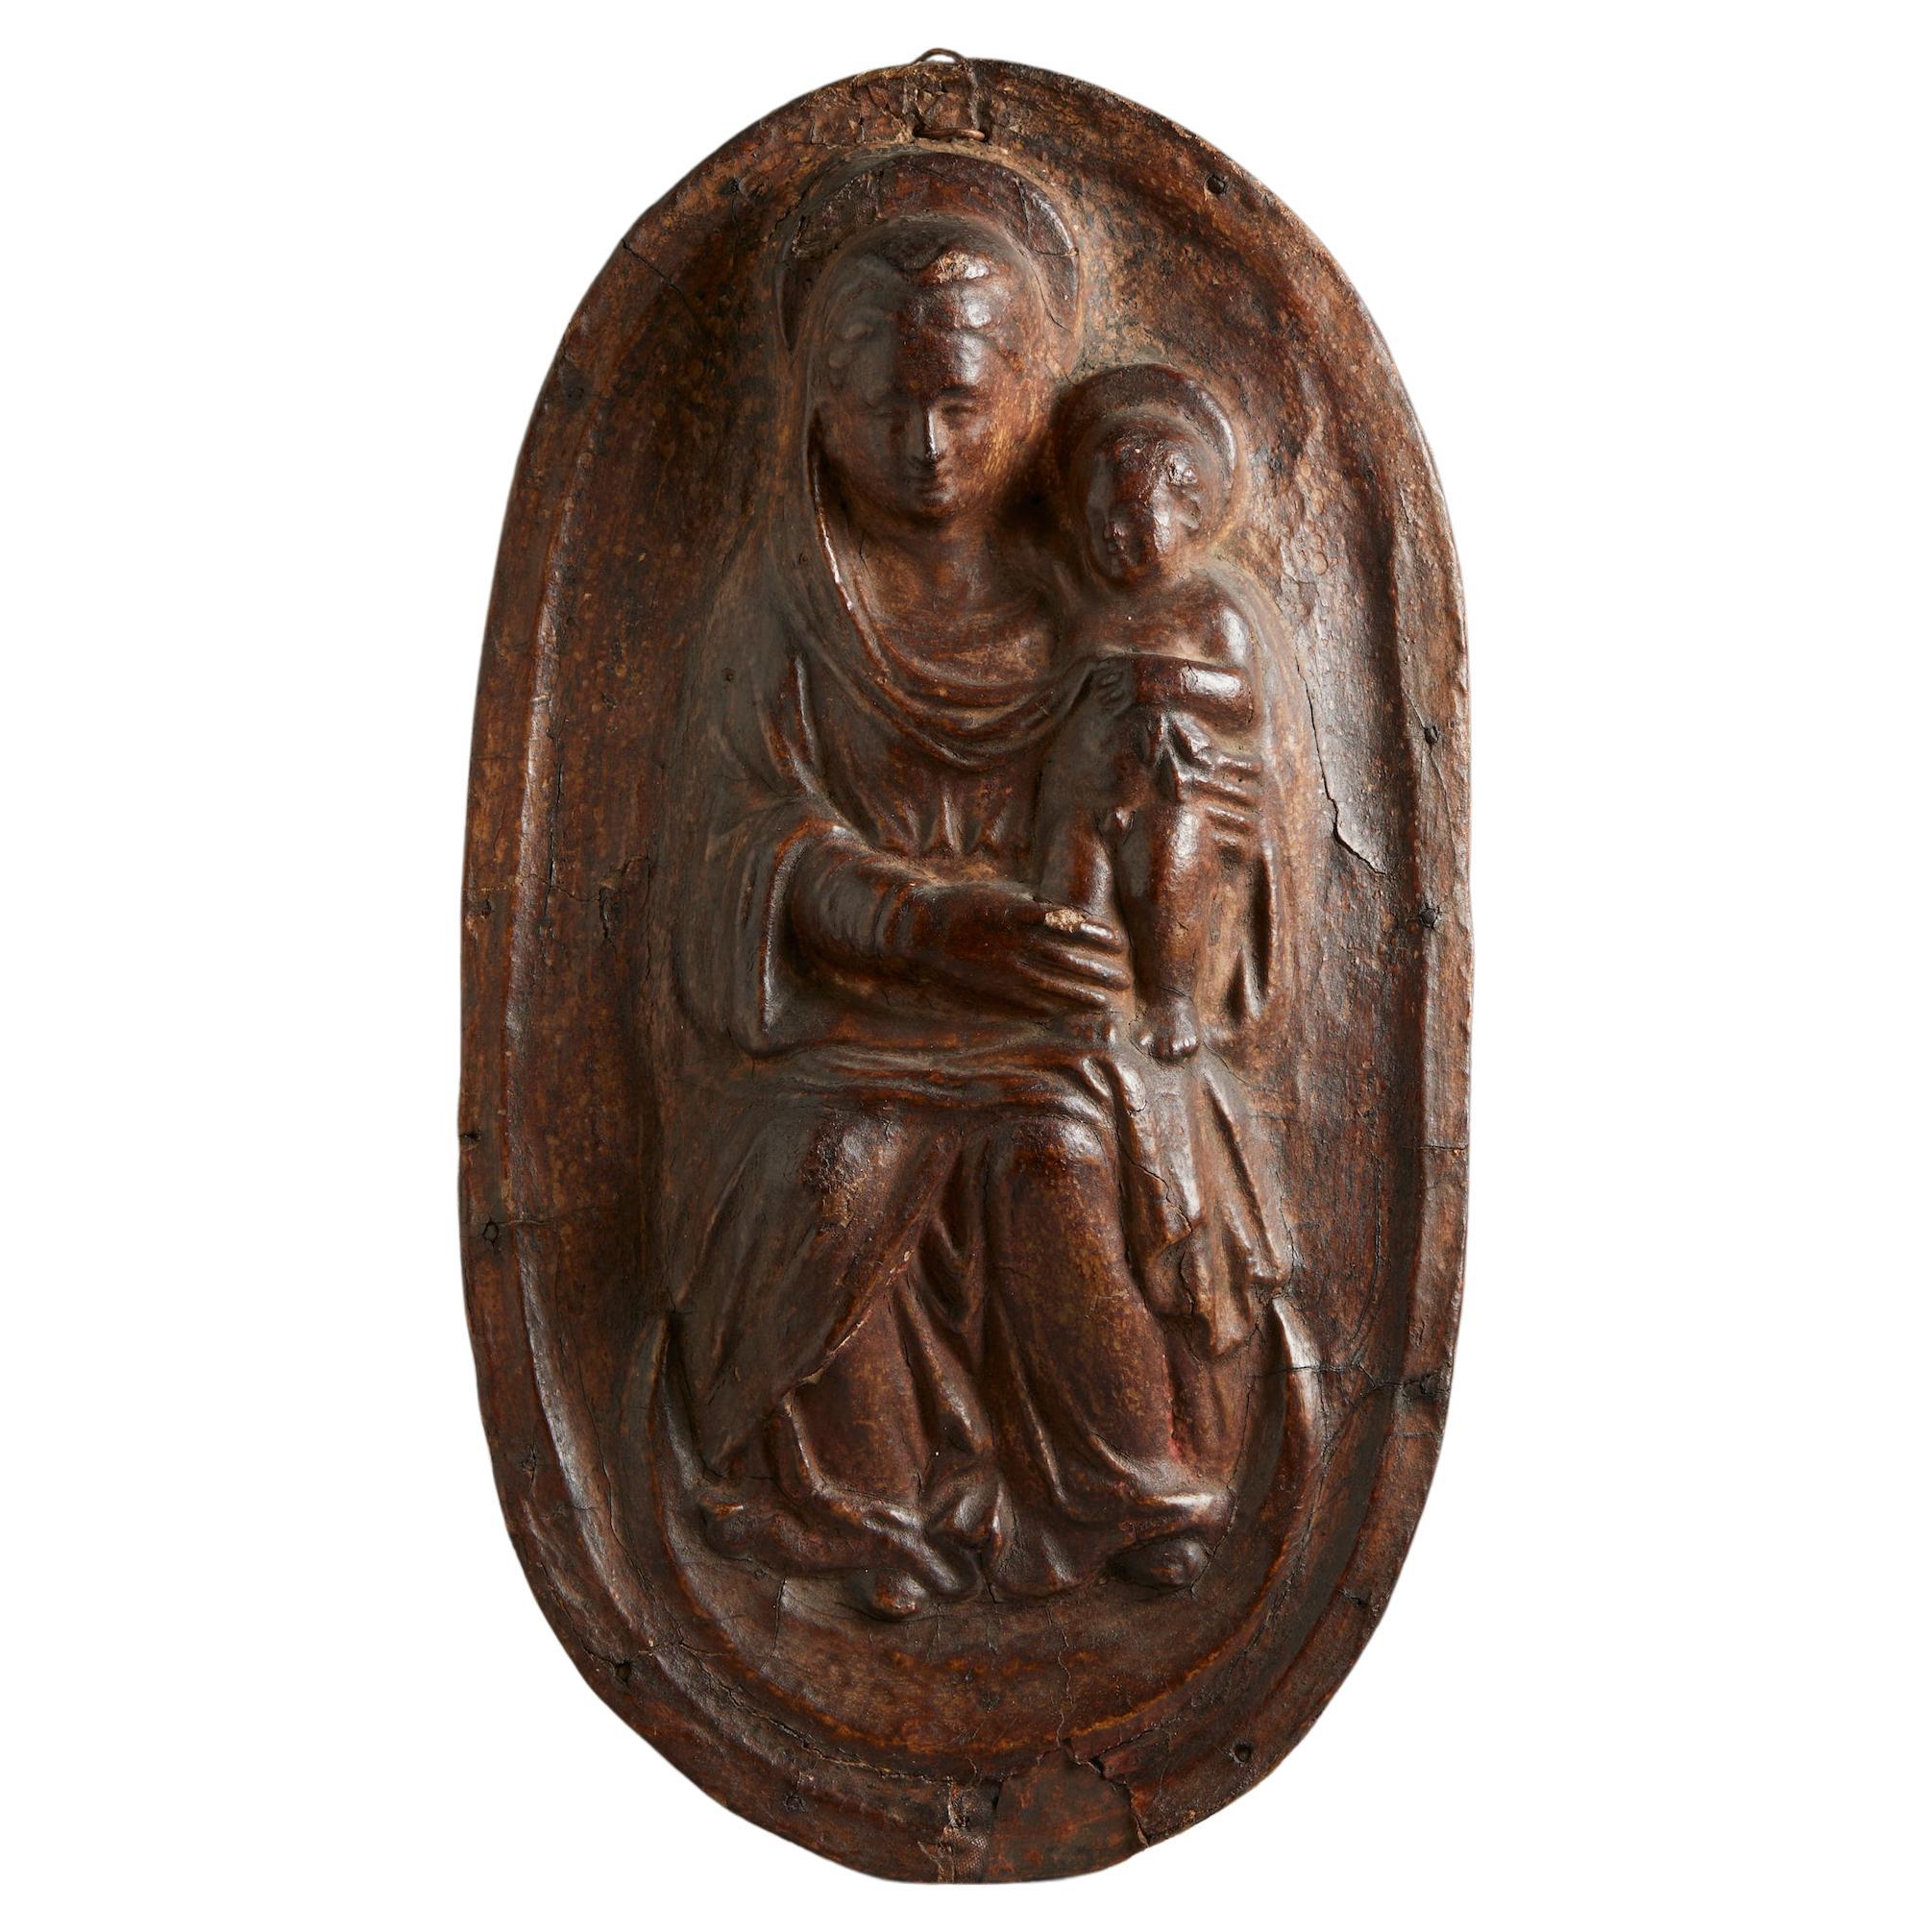 Leather relief depicting Madonna enthroned with Child on her lap